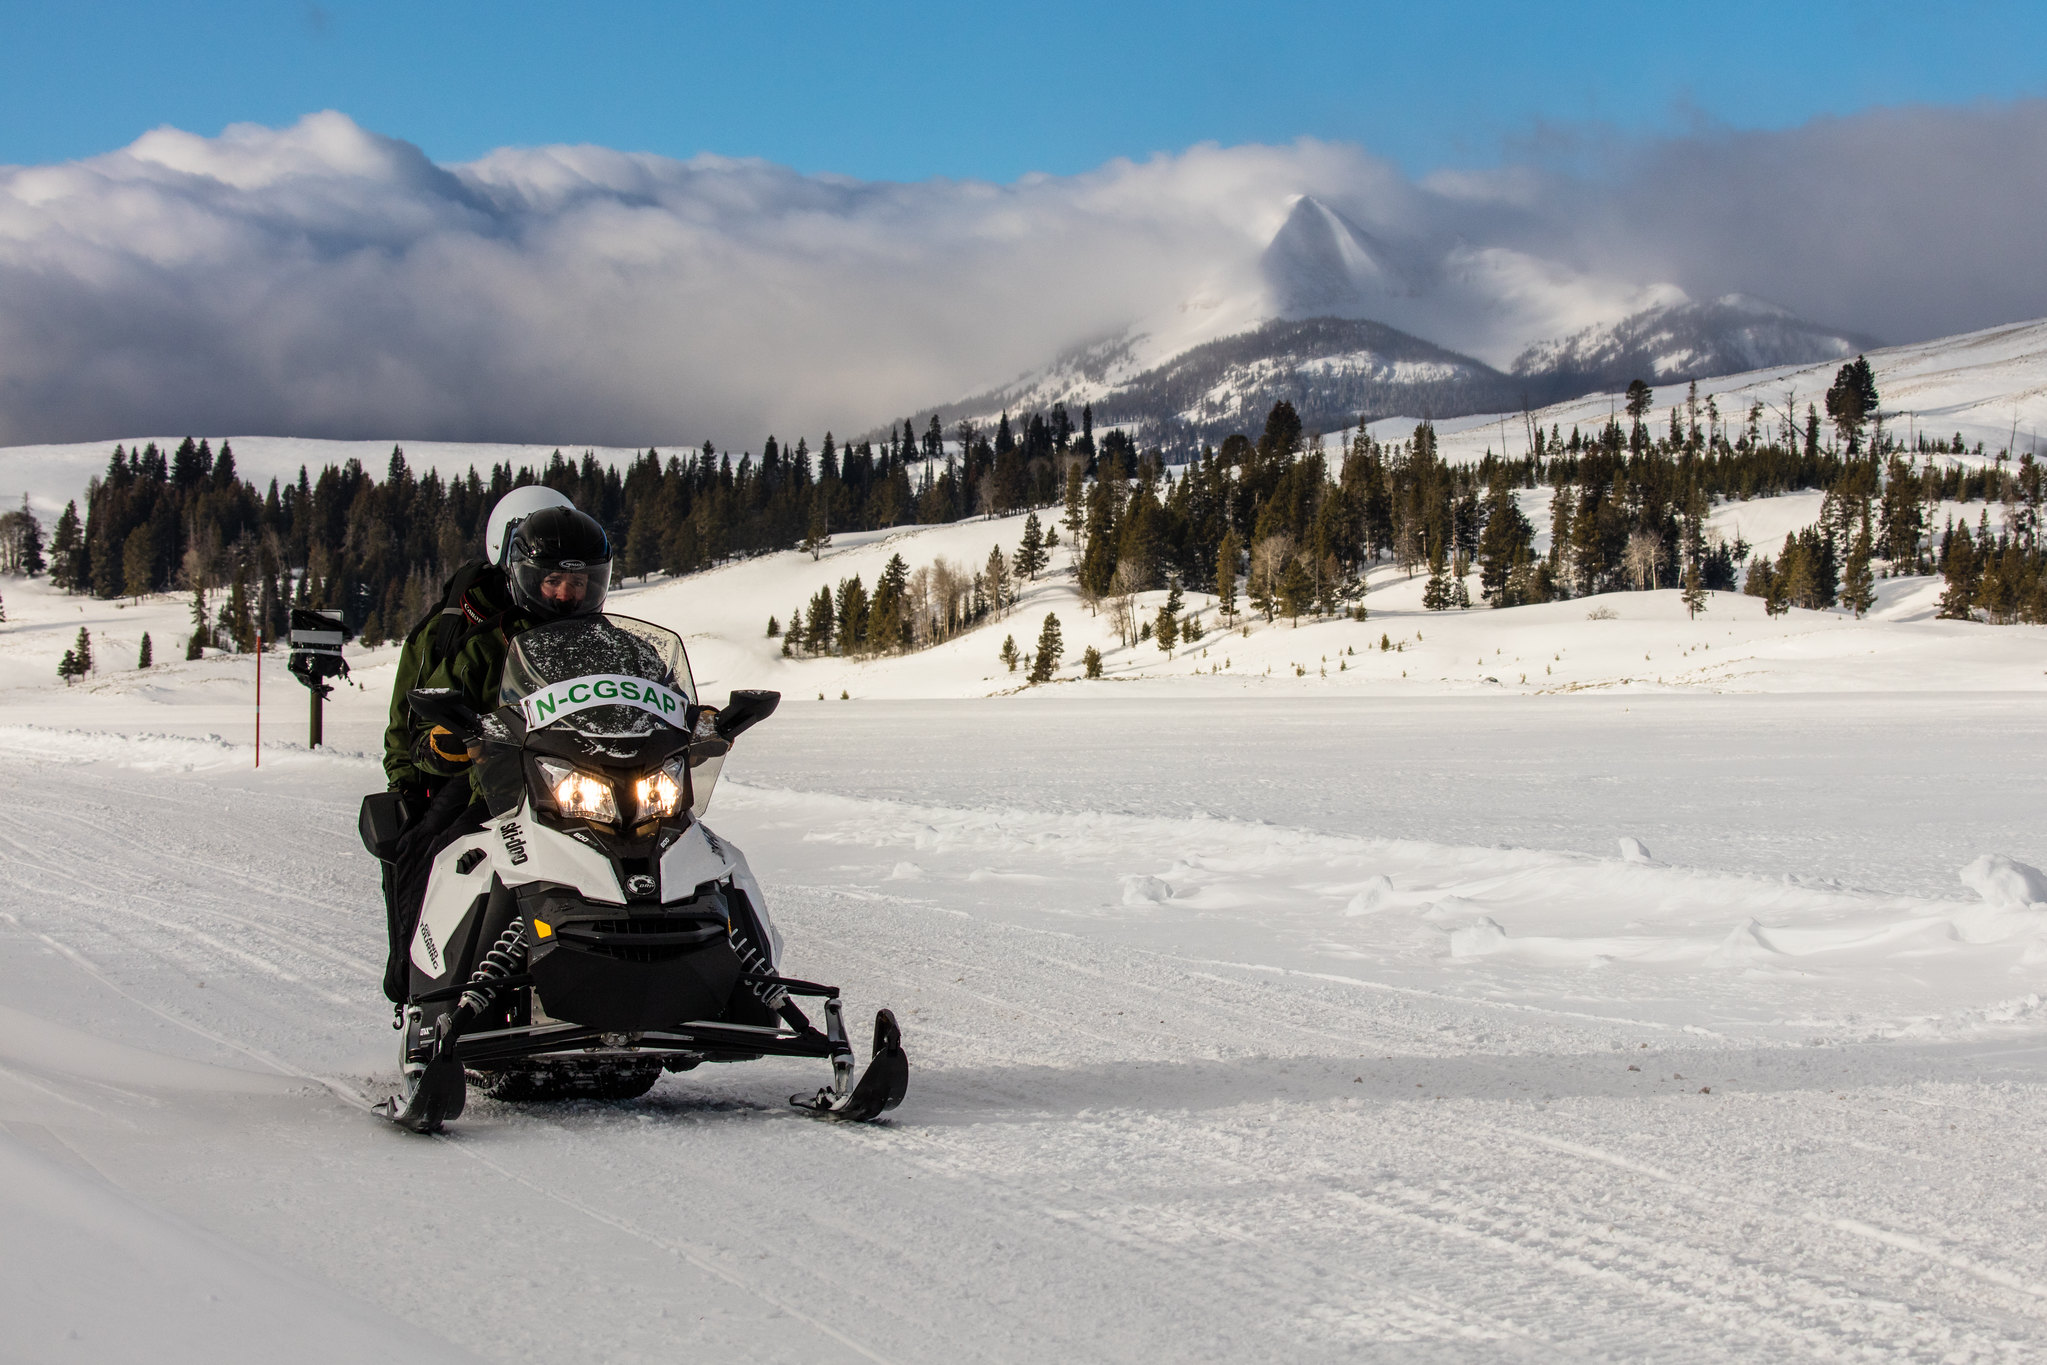 Two people on a snowmobile in a wintry landscape